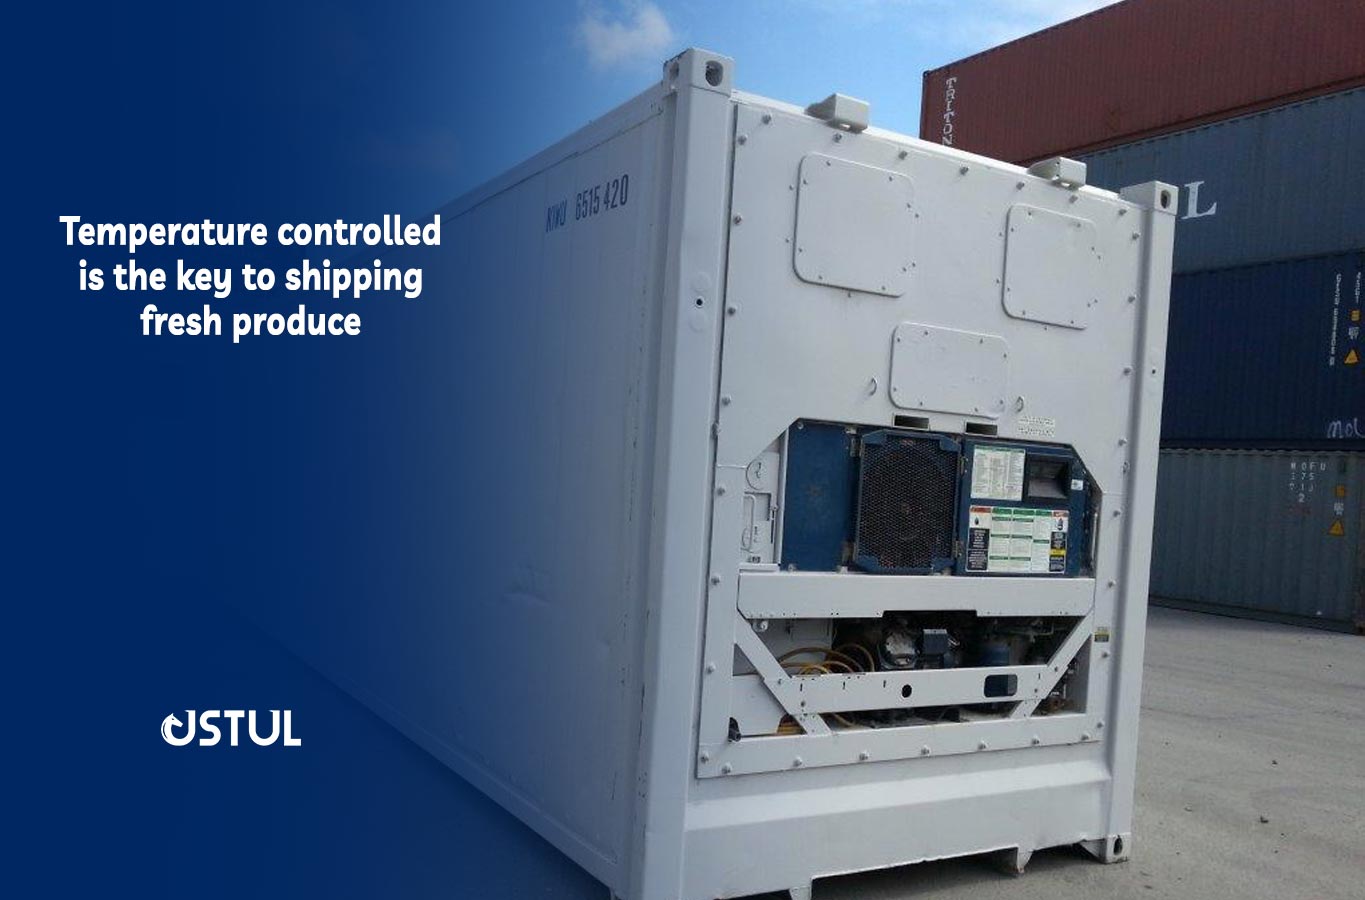 Temperature Controlled is The Key to Shipping Fresh Produce